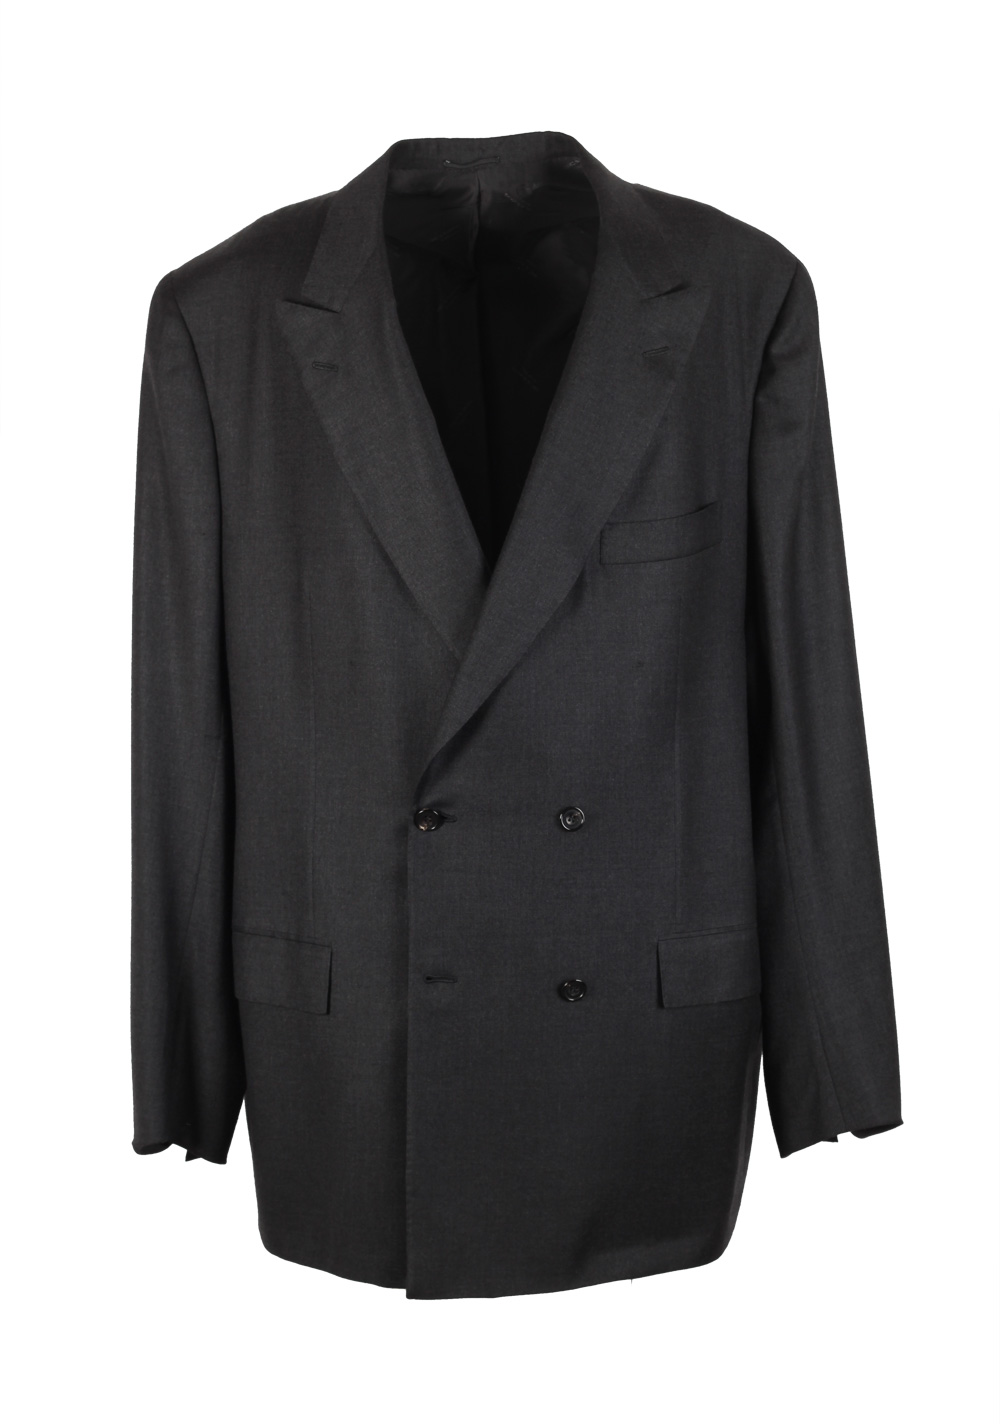 Kiton Double Breasted Suit Size 54L / 44L Long U.S. 100% Cashmere ...